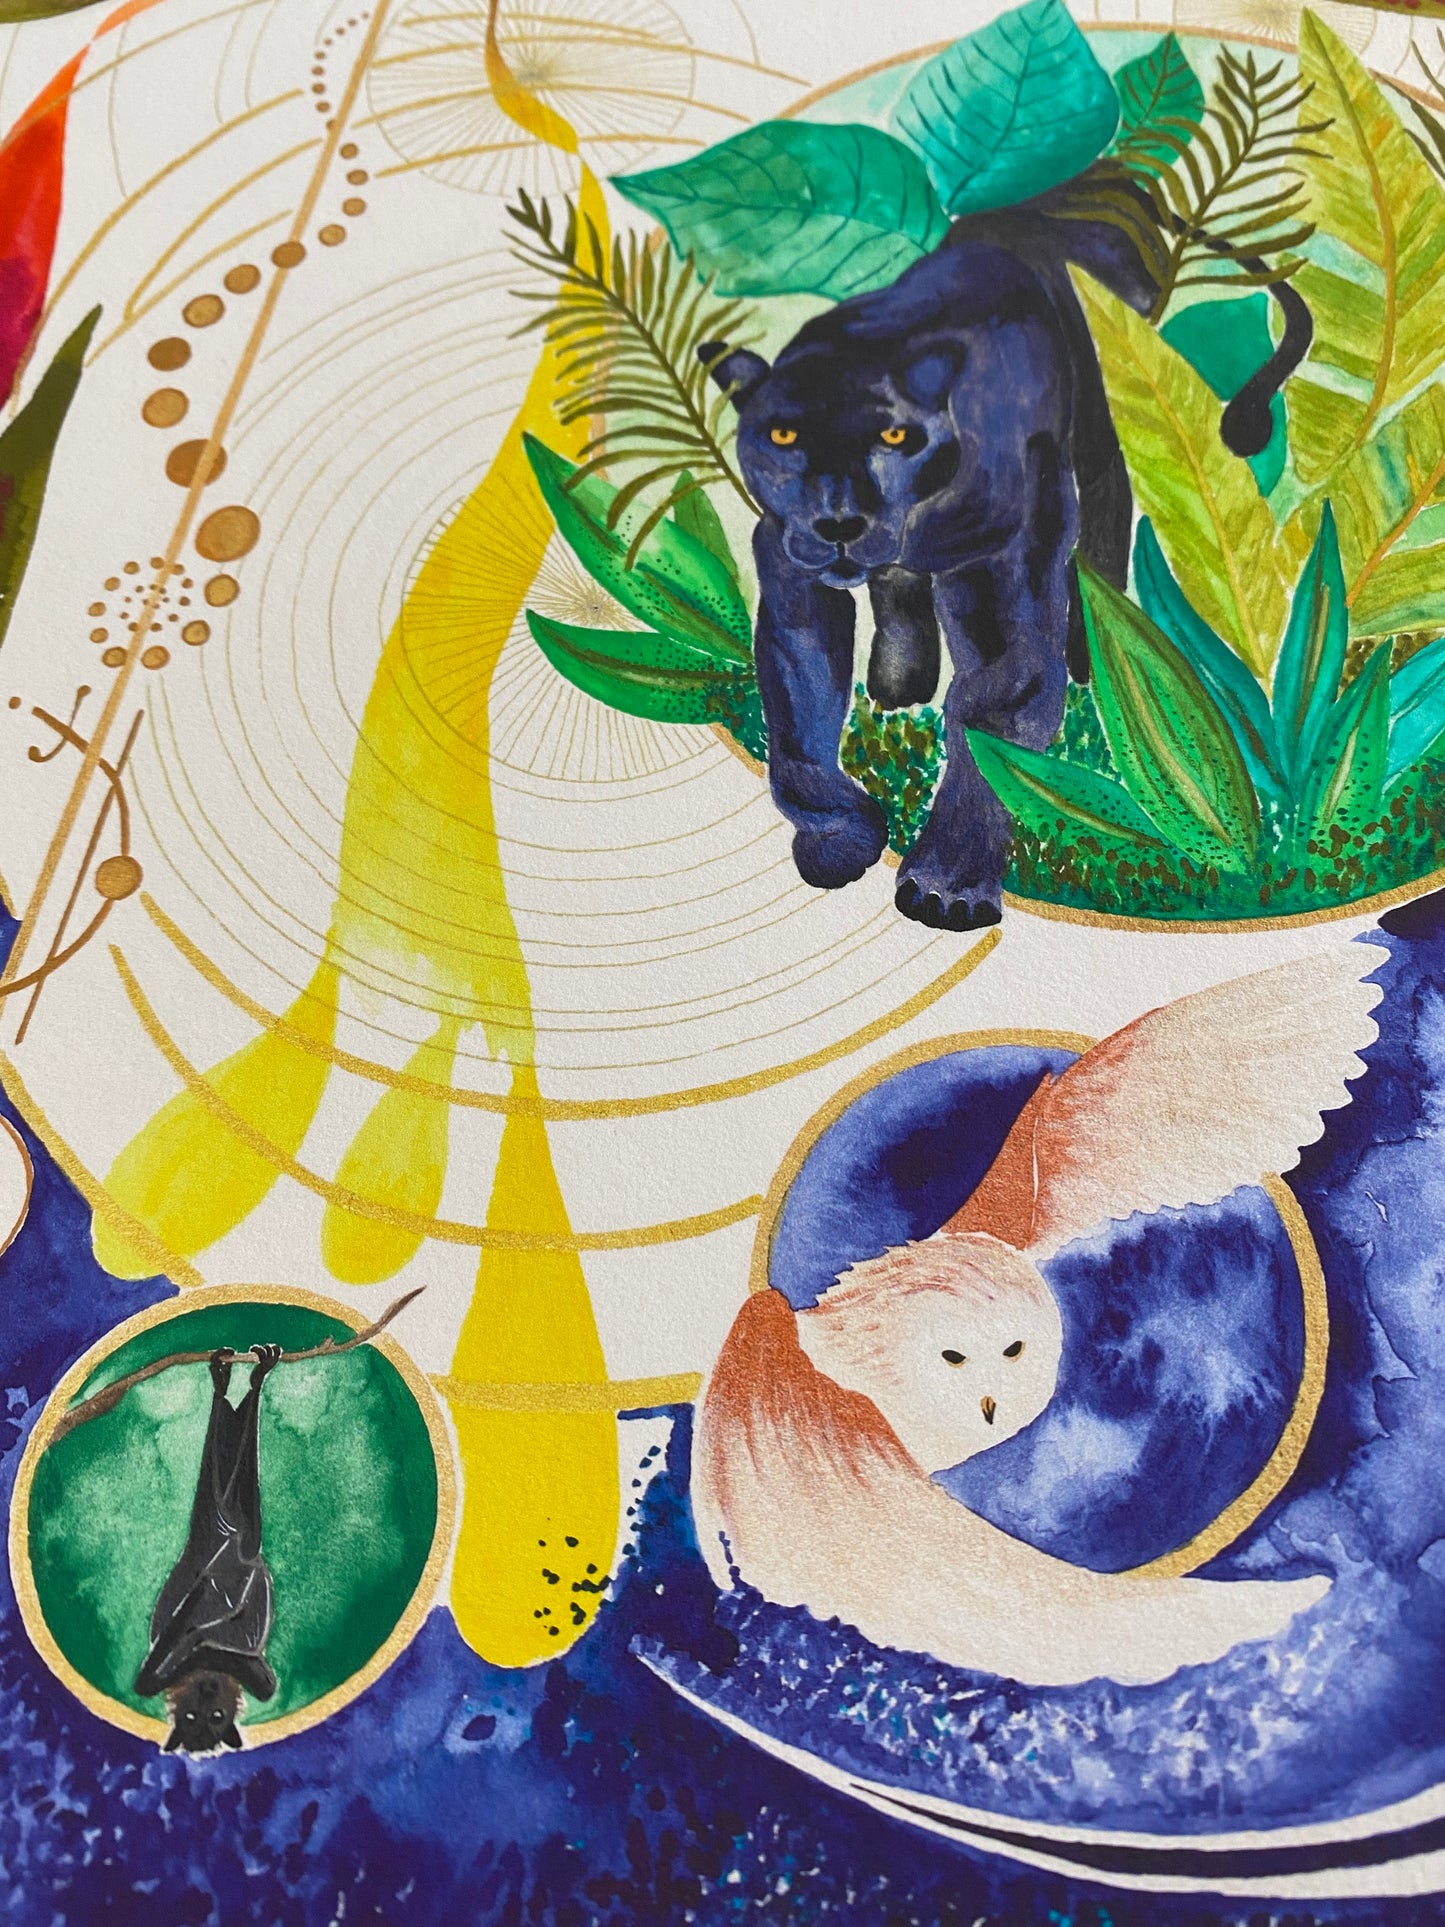 fine art print of a watercolour painting with panther, Egyptian beetle, owl and bat representing the path into our shadows